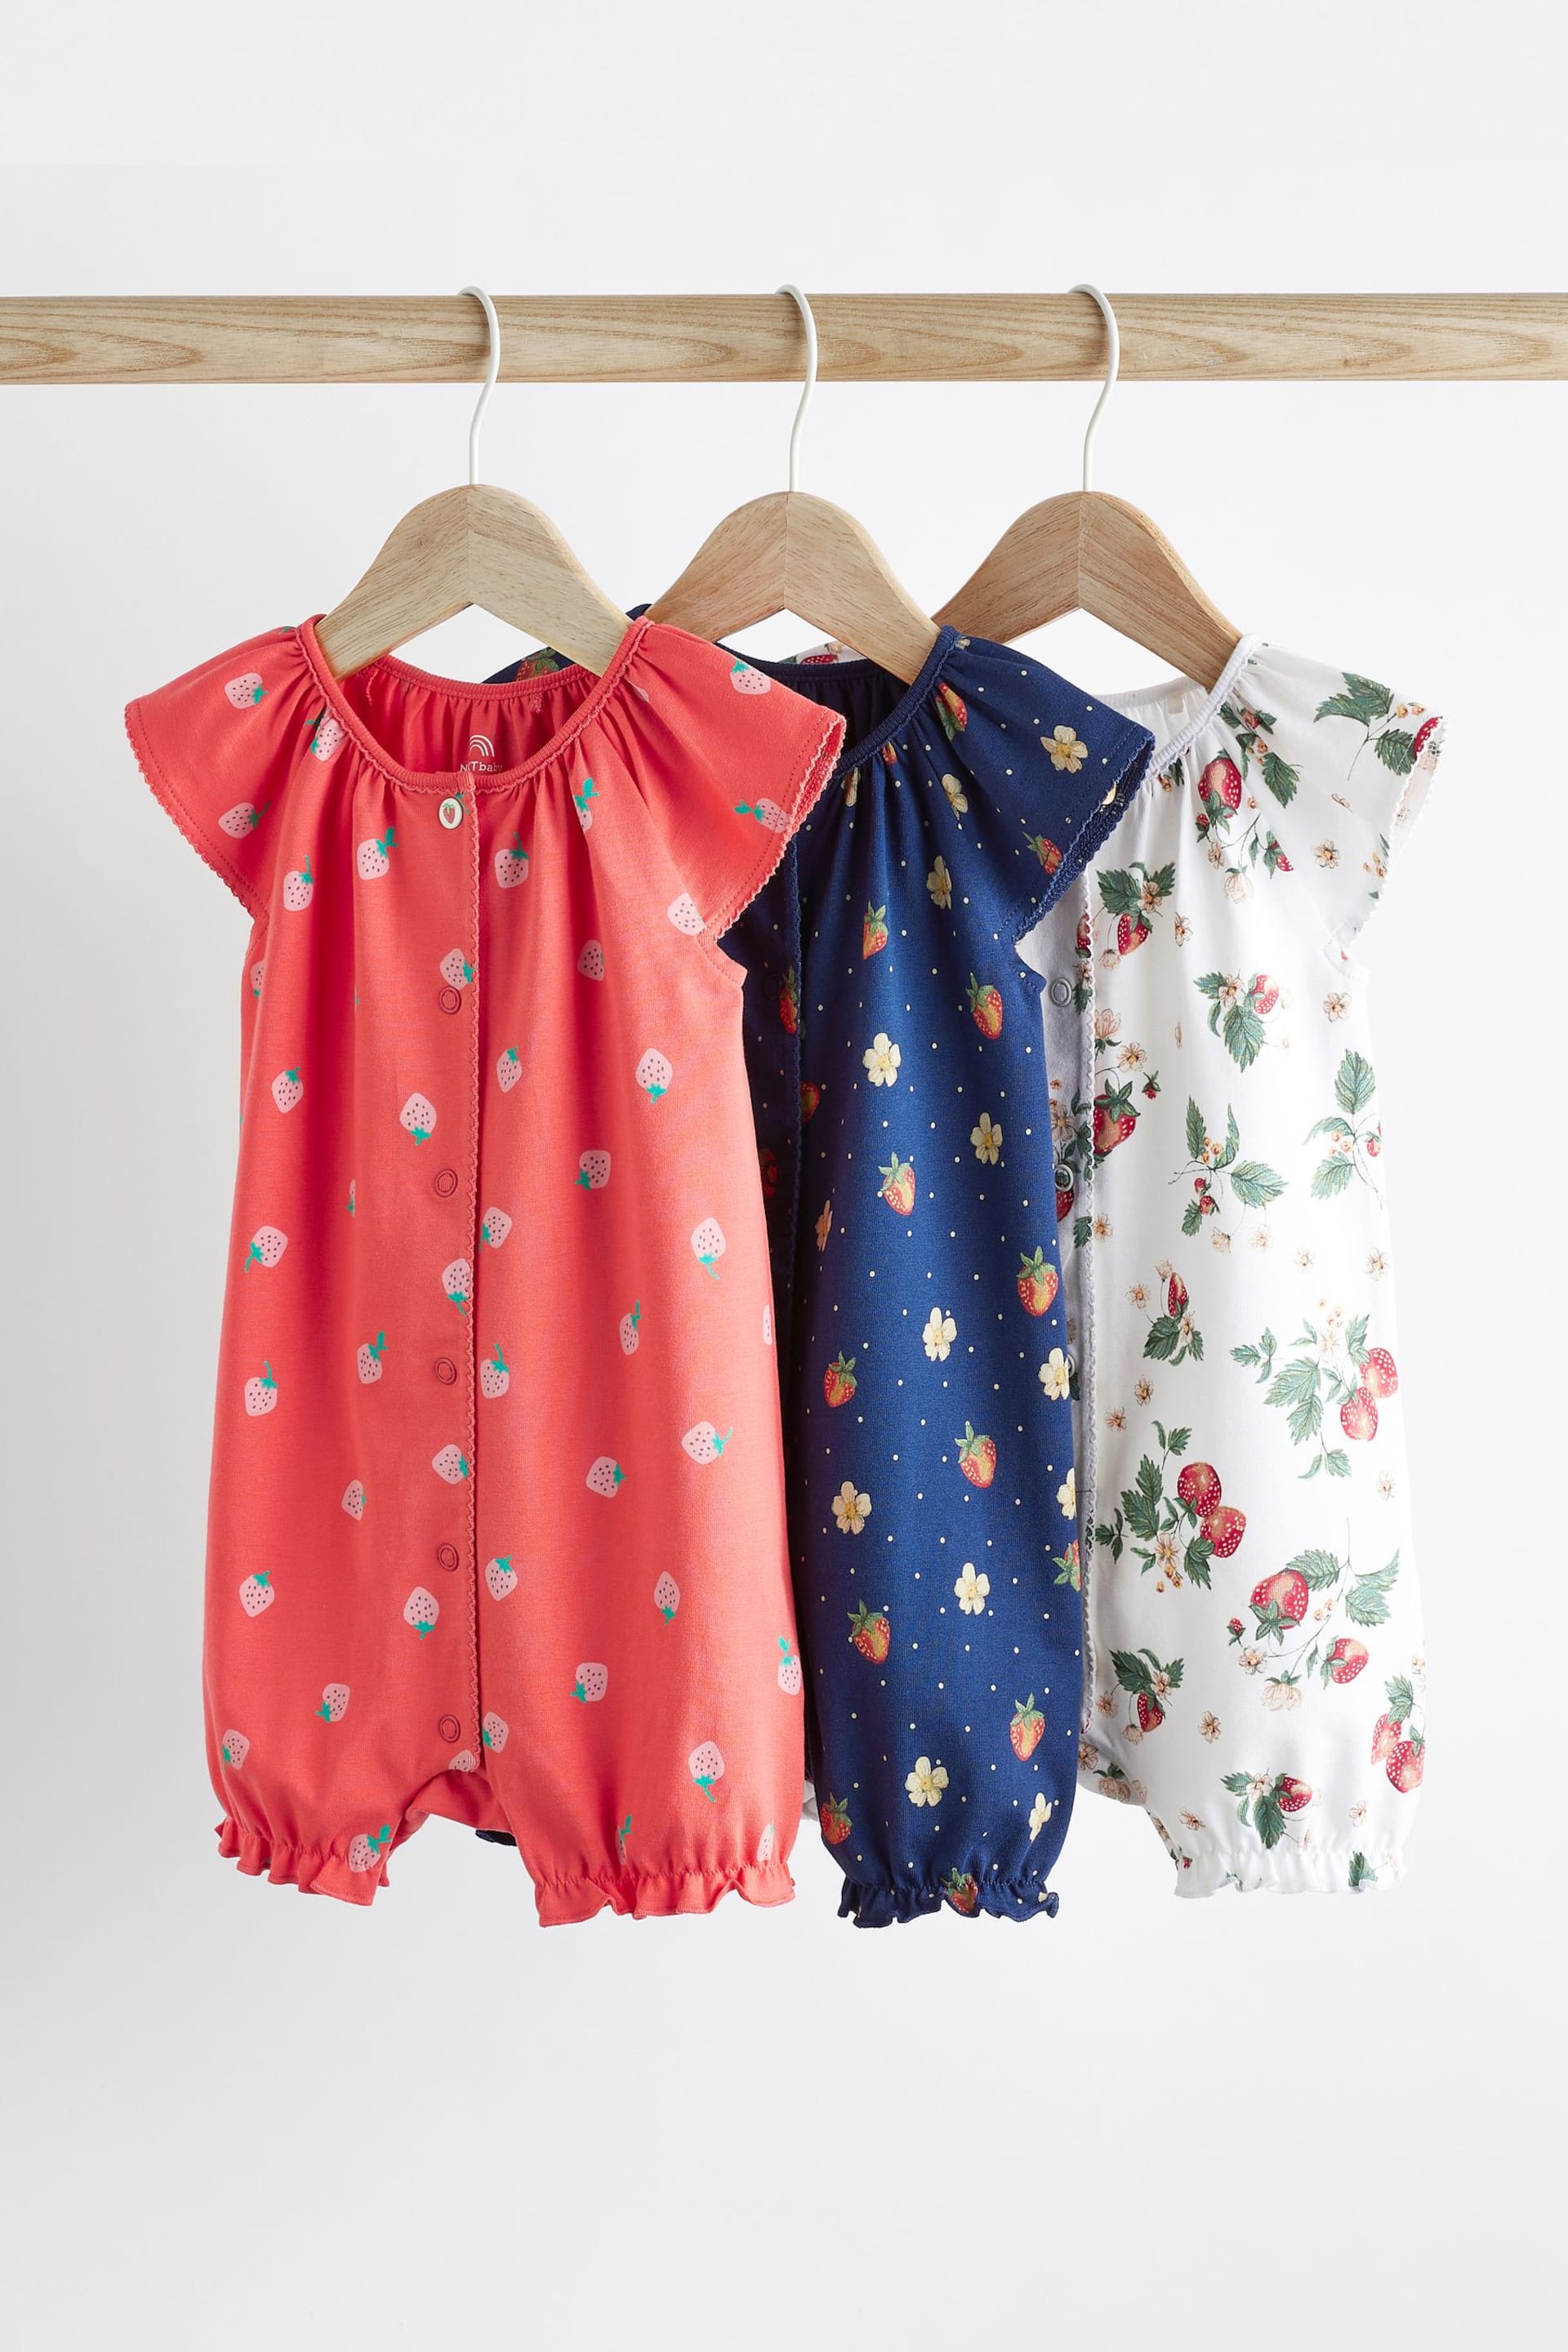 White/Blue/Red Strawberry Baby Rompers 3 Pack - Image 1 of 9